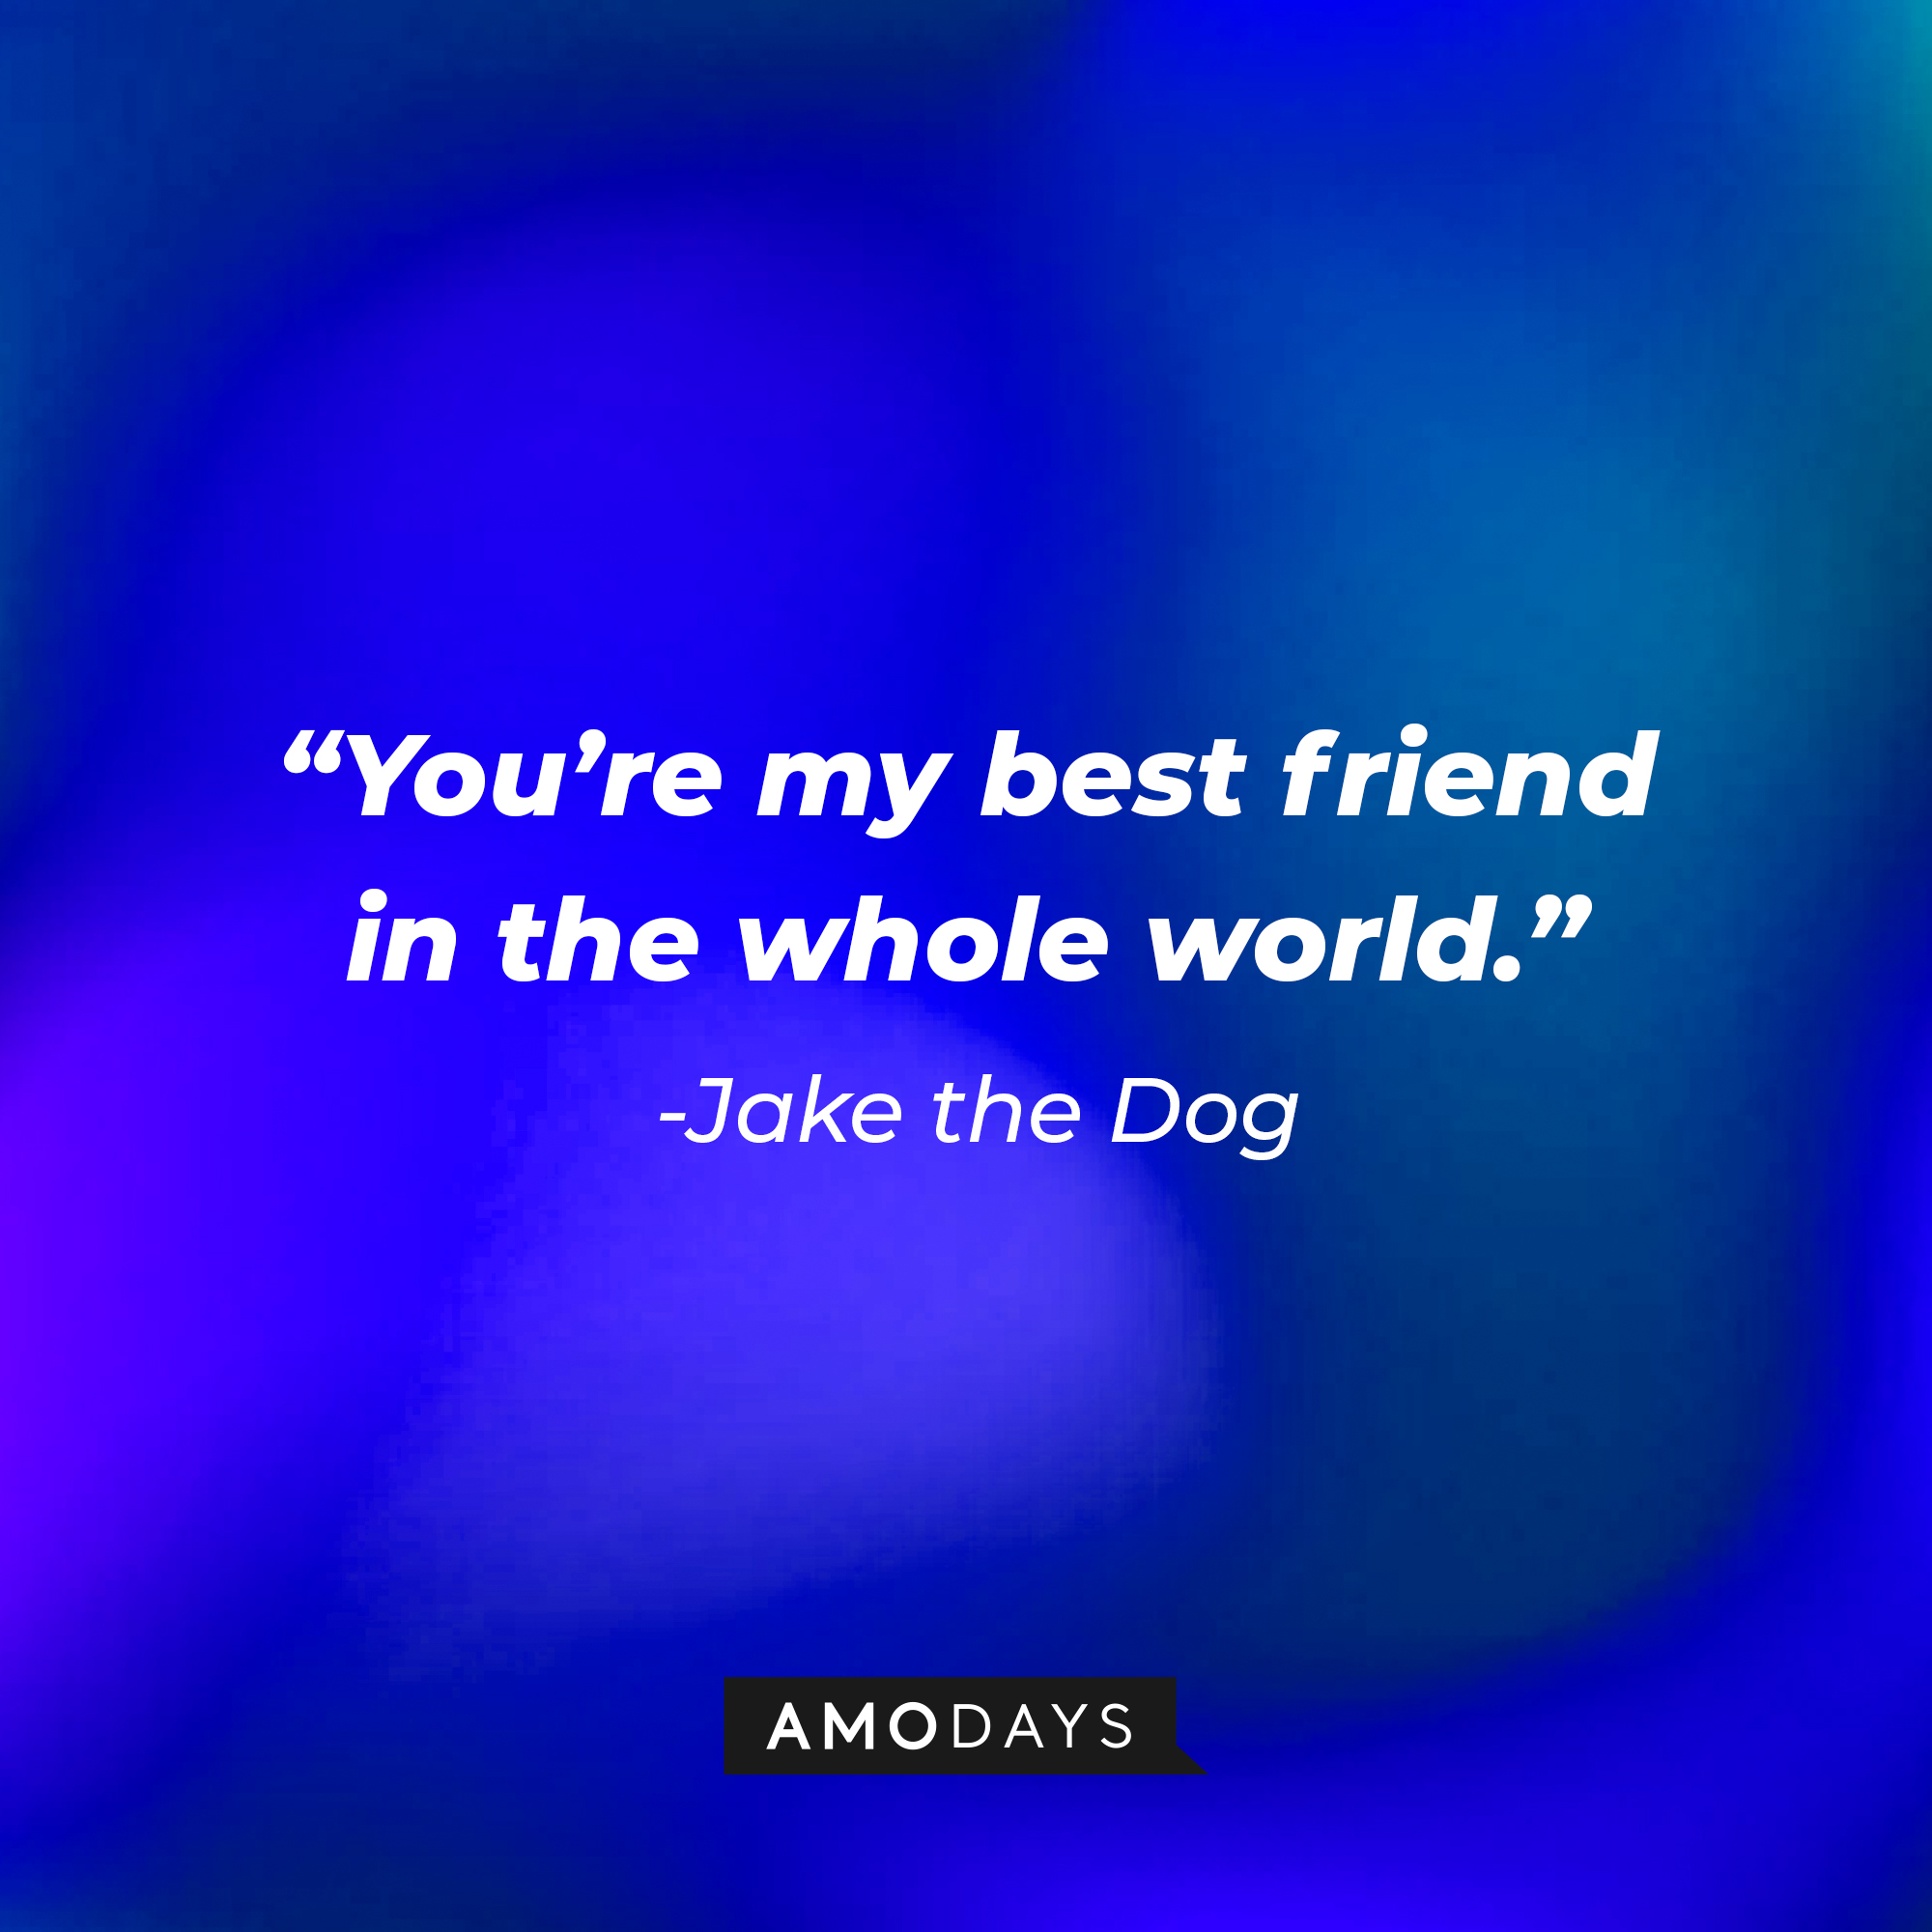 Jake the Dog’s quote: “You’re my best friend in the whole world.”  | Source: AmoDays